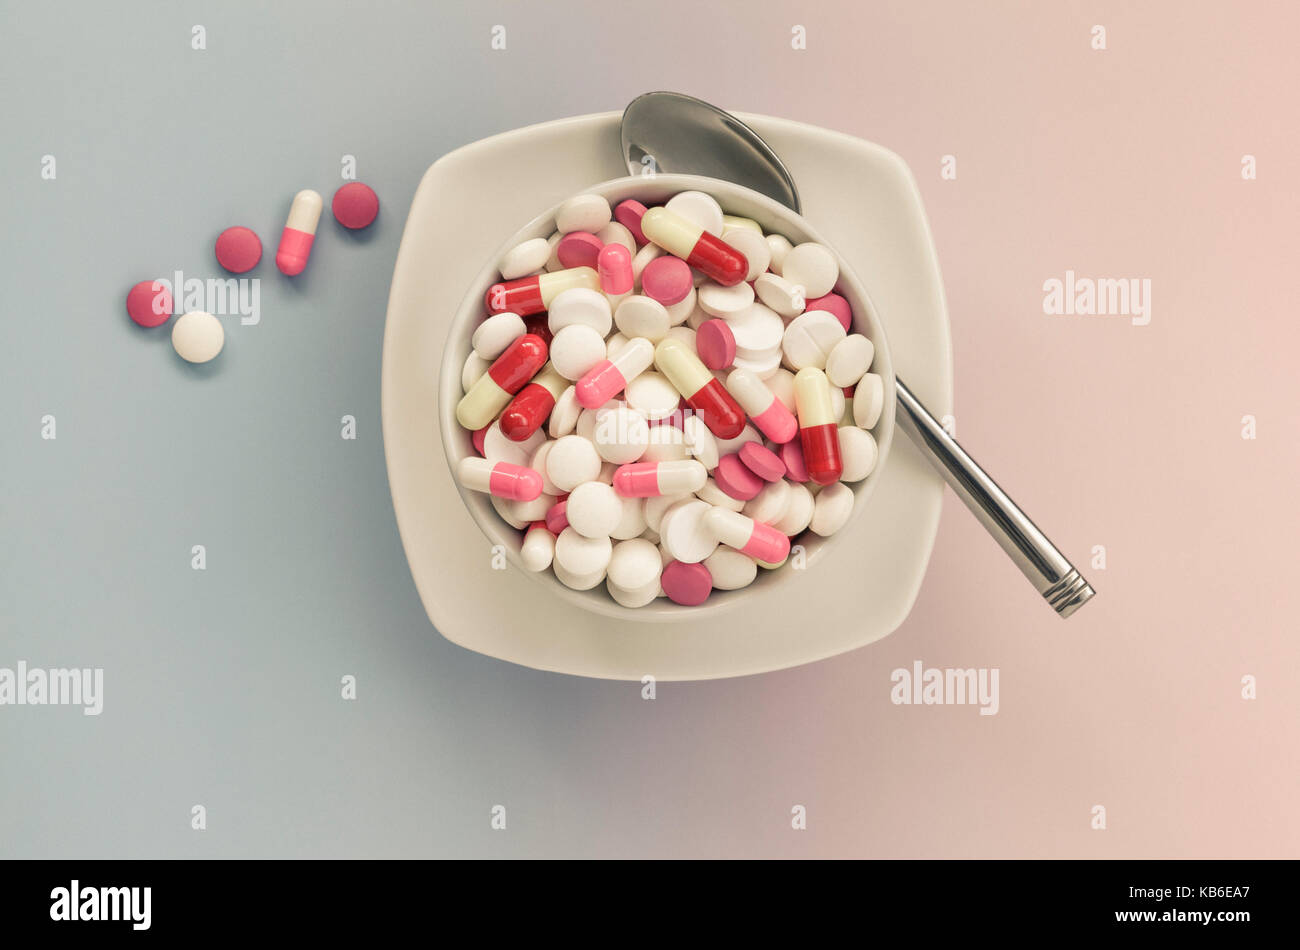 Mixed painkillers ,pills in white bowl Stock Photo